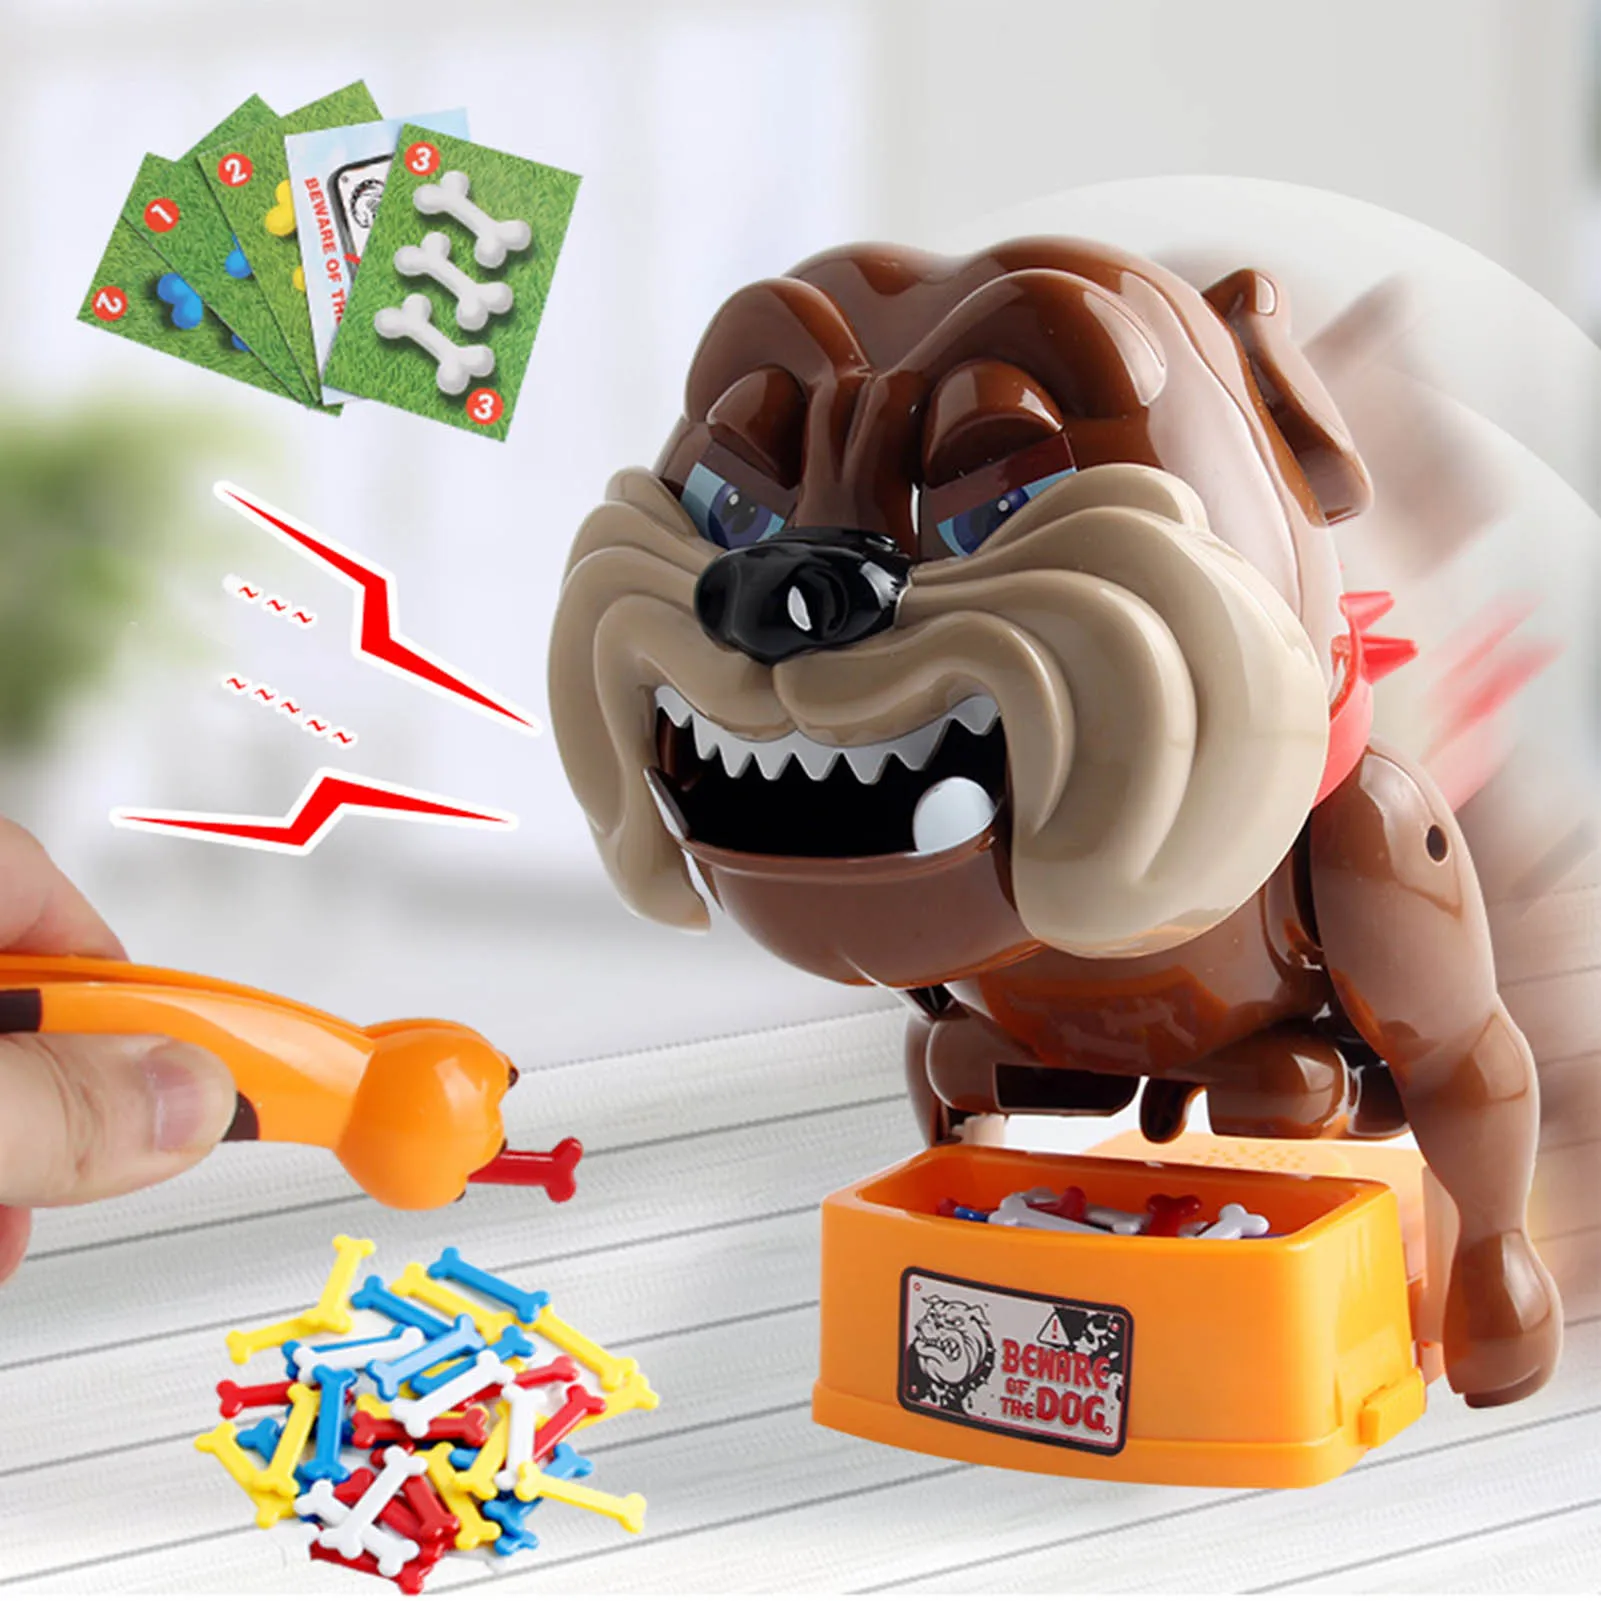 

Beware Of The Evil Dog Large Board Game Parent-child Tricky Toy Bite Your Hand Evil Dog Spoof Children's Toy